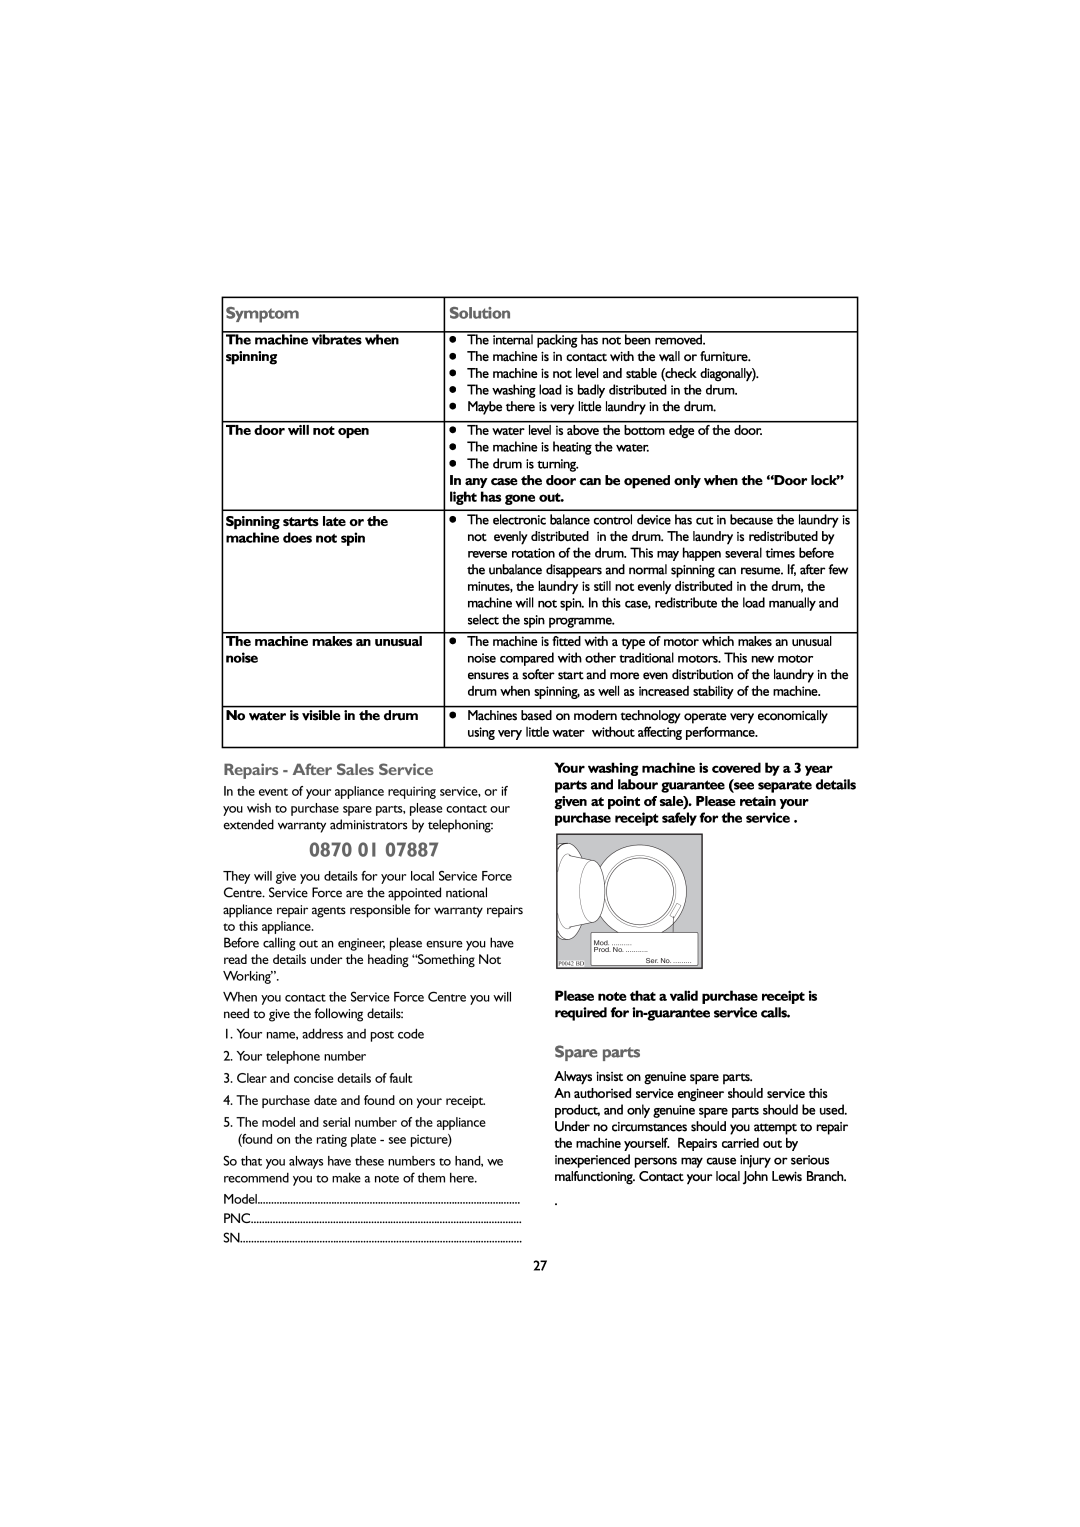 John Lewis JLWM 1203 instruction manual 0870 01, Symptom, Solution, Repairs - After Sales Service, Spare parts 